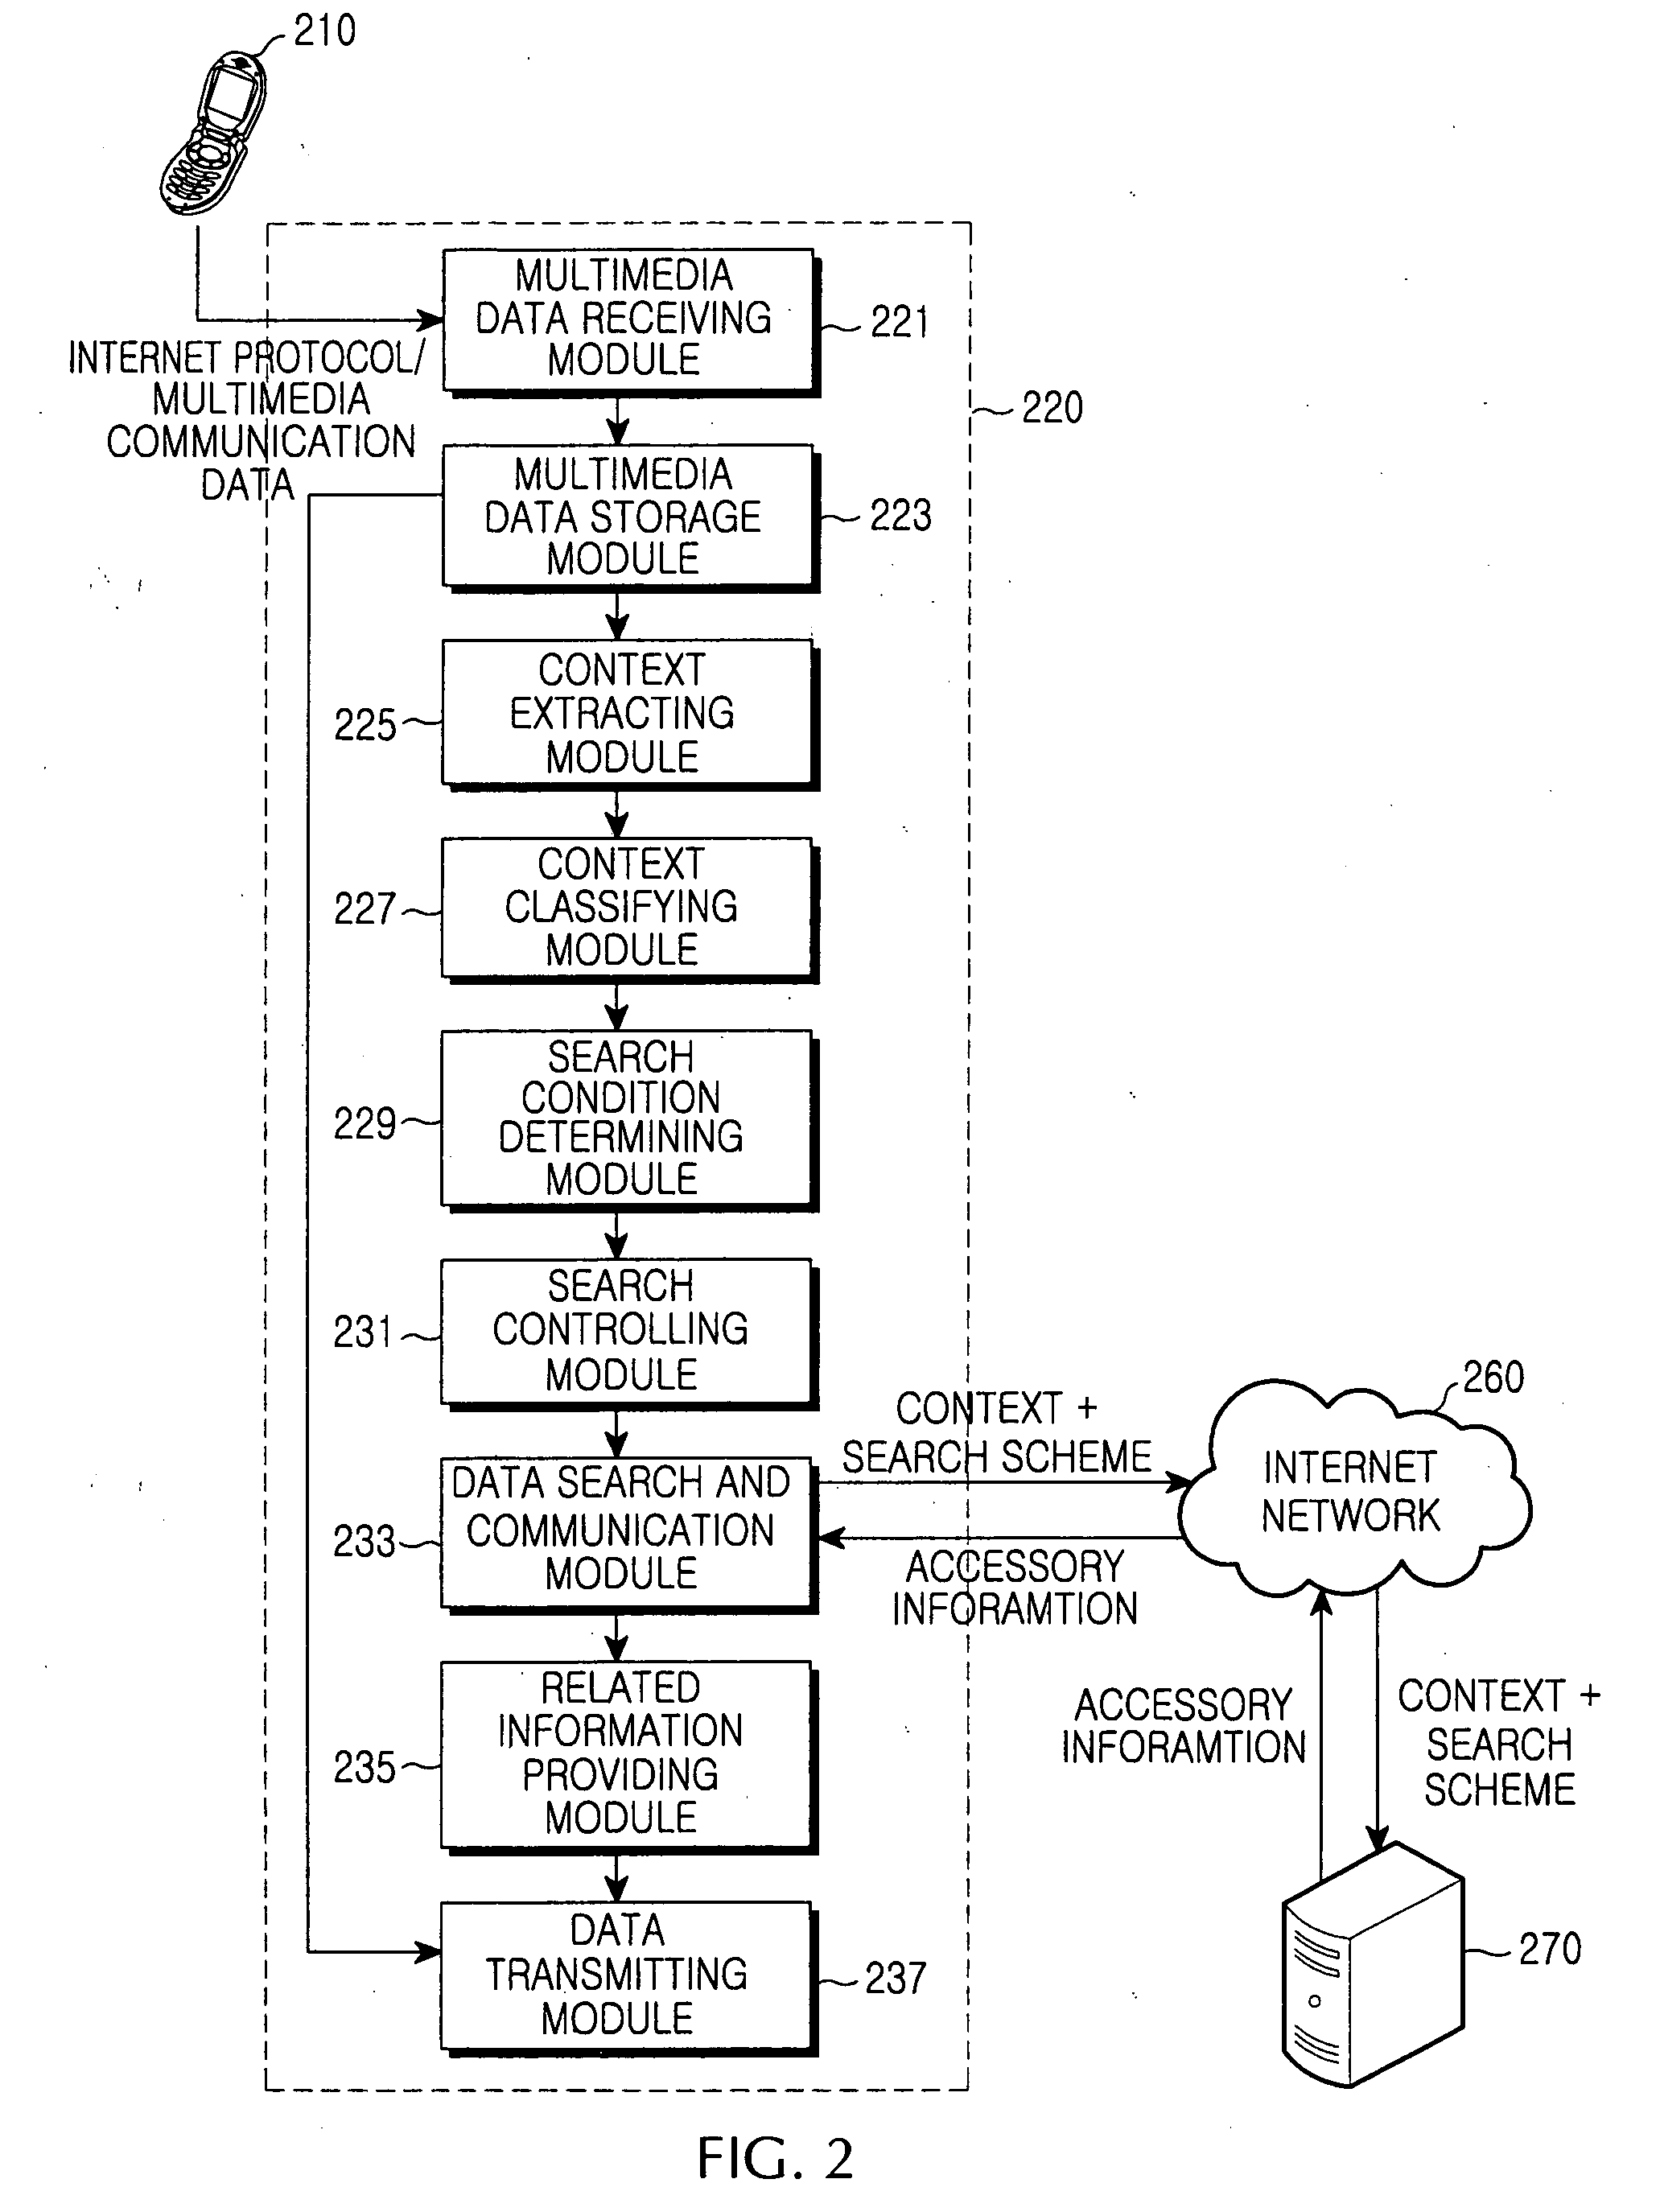 Apparatus and method for extracting context and providing information based on context in multimedia communication system